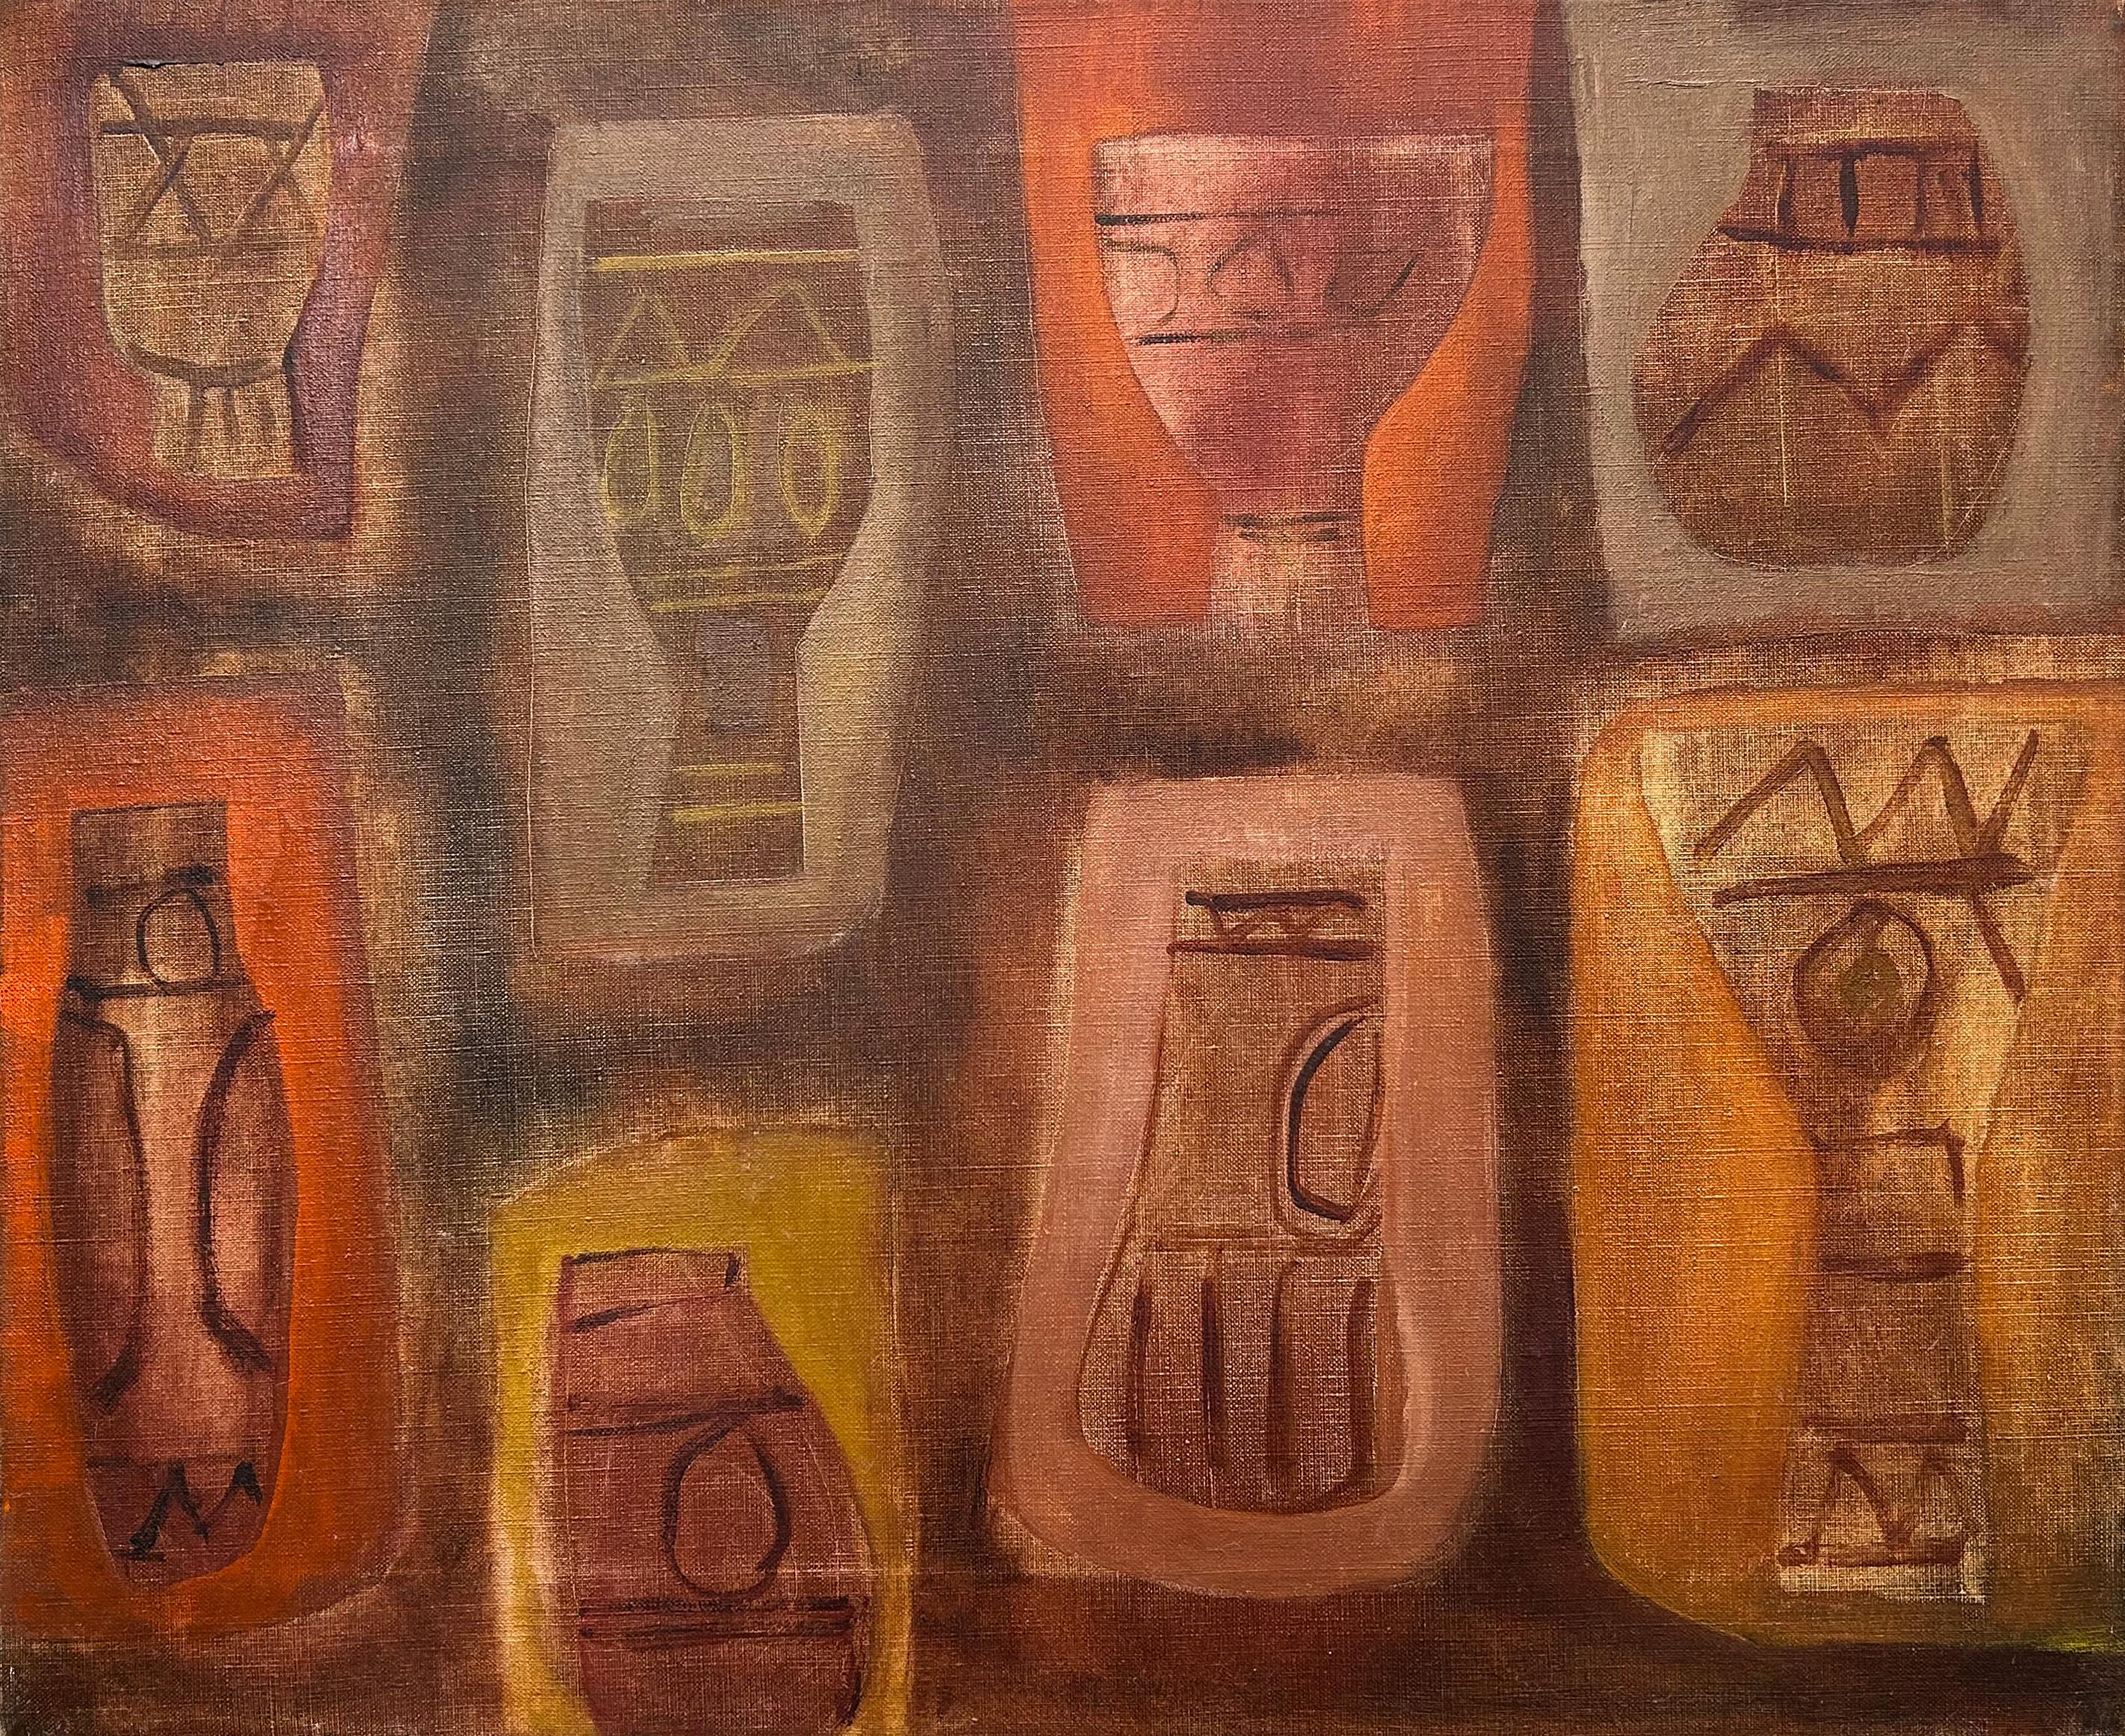 Pueblo Pottery, Cultural Commentary and Still Life by Female American Modernist